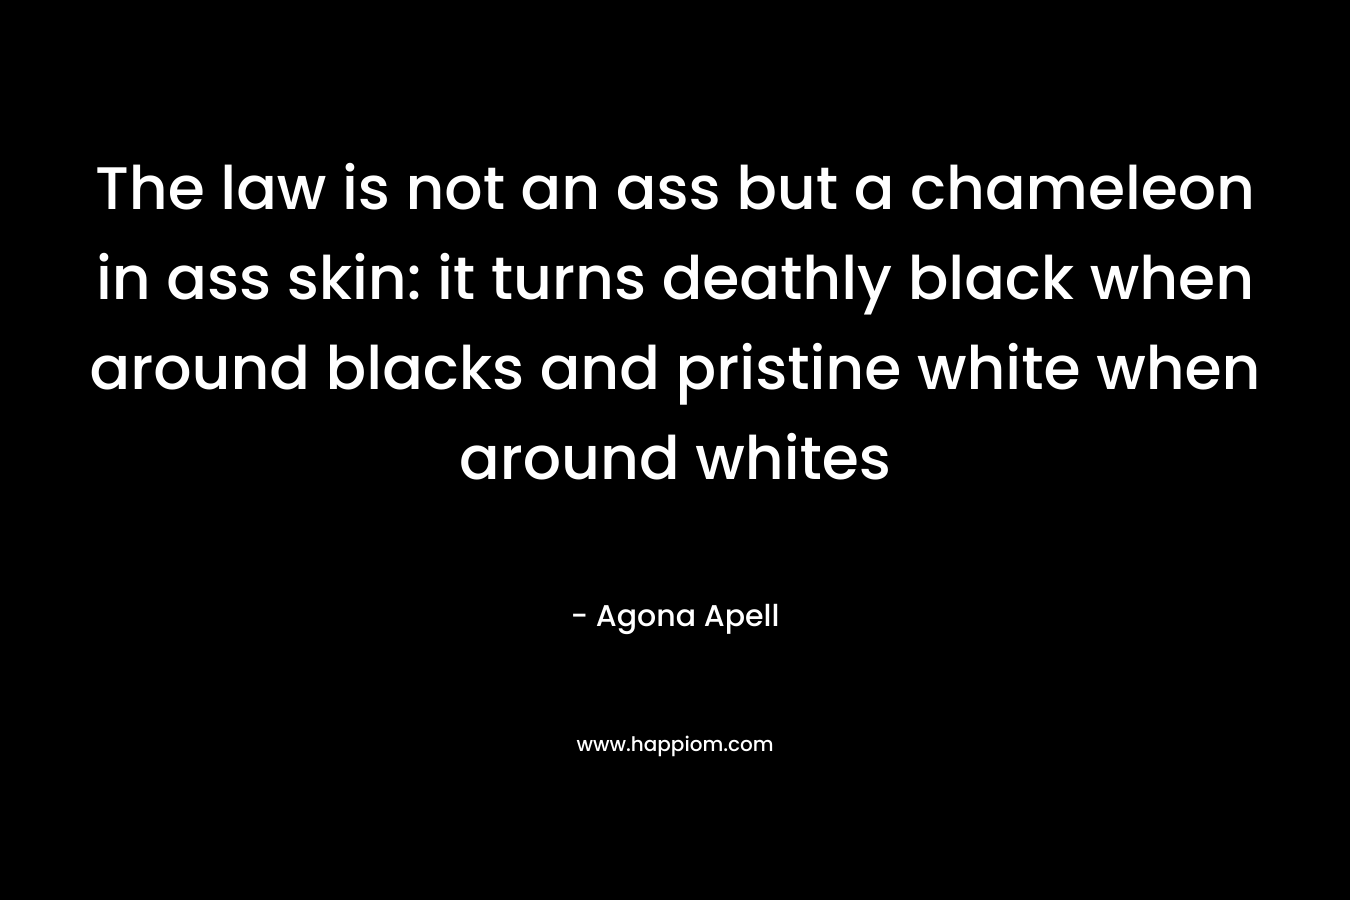 The law is not an ass but a chameleon in ass skin: it turns deathly black when around blacks and pristine white when around whites